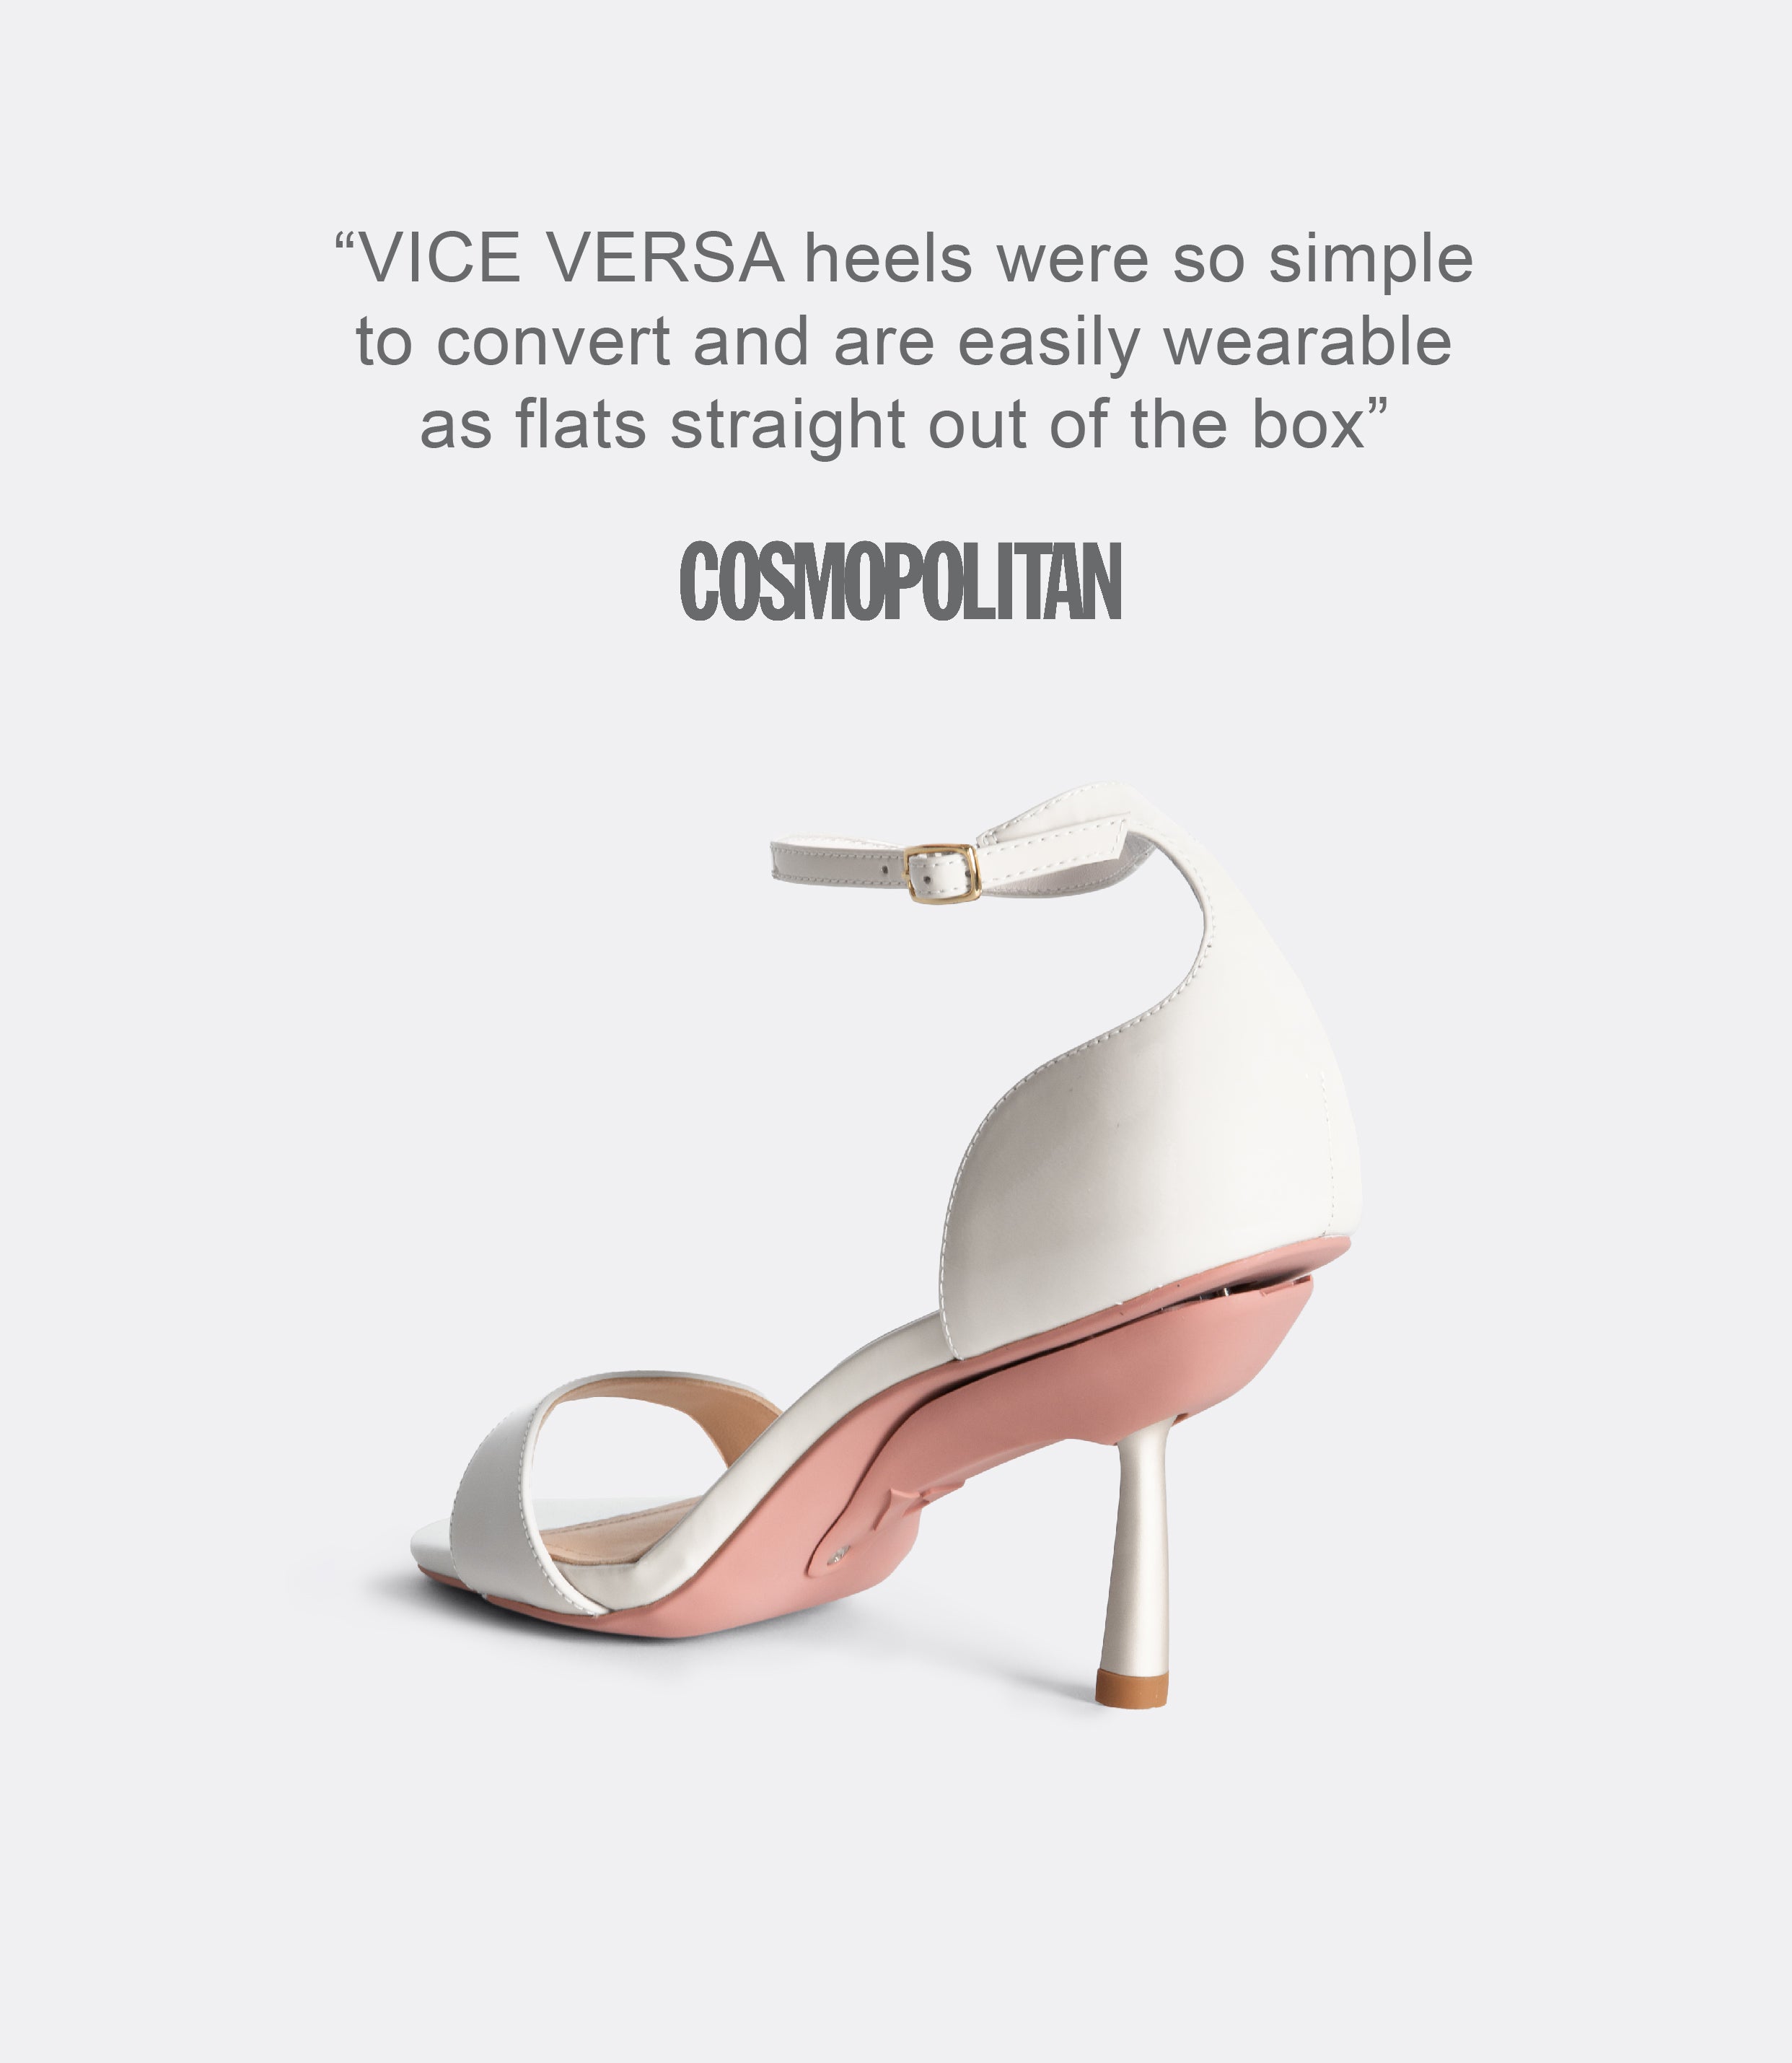 A quote from Cosmopolitan and a back view of the white editor sandal.